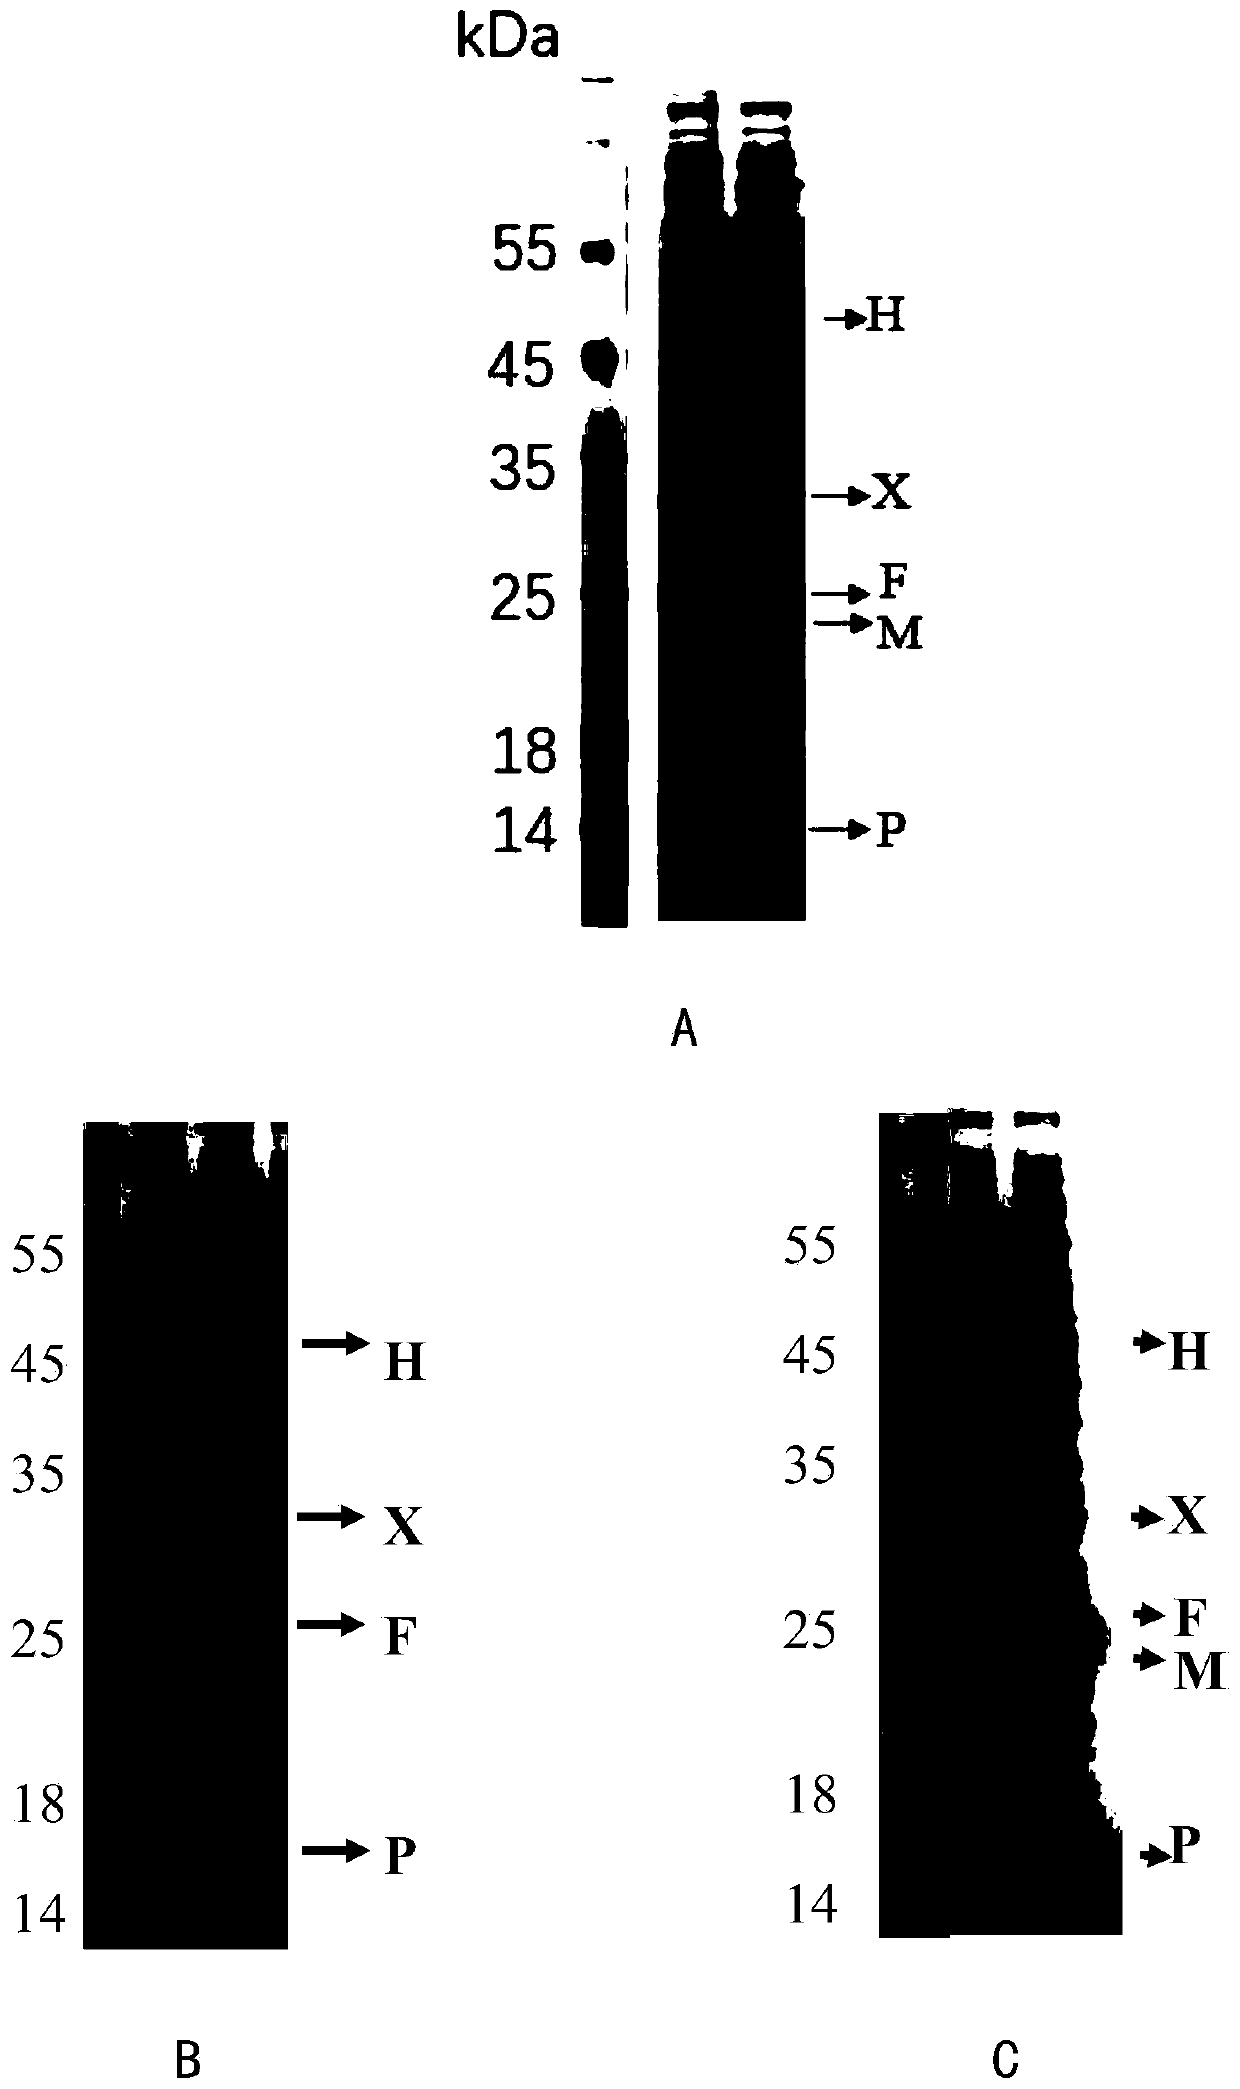 Recombinant escherichia coli for producing N-acetyl-5-hydroxytryptamine, and construction method and application of recombinant escherichia coli